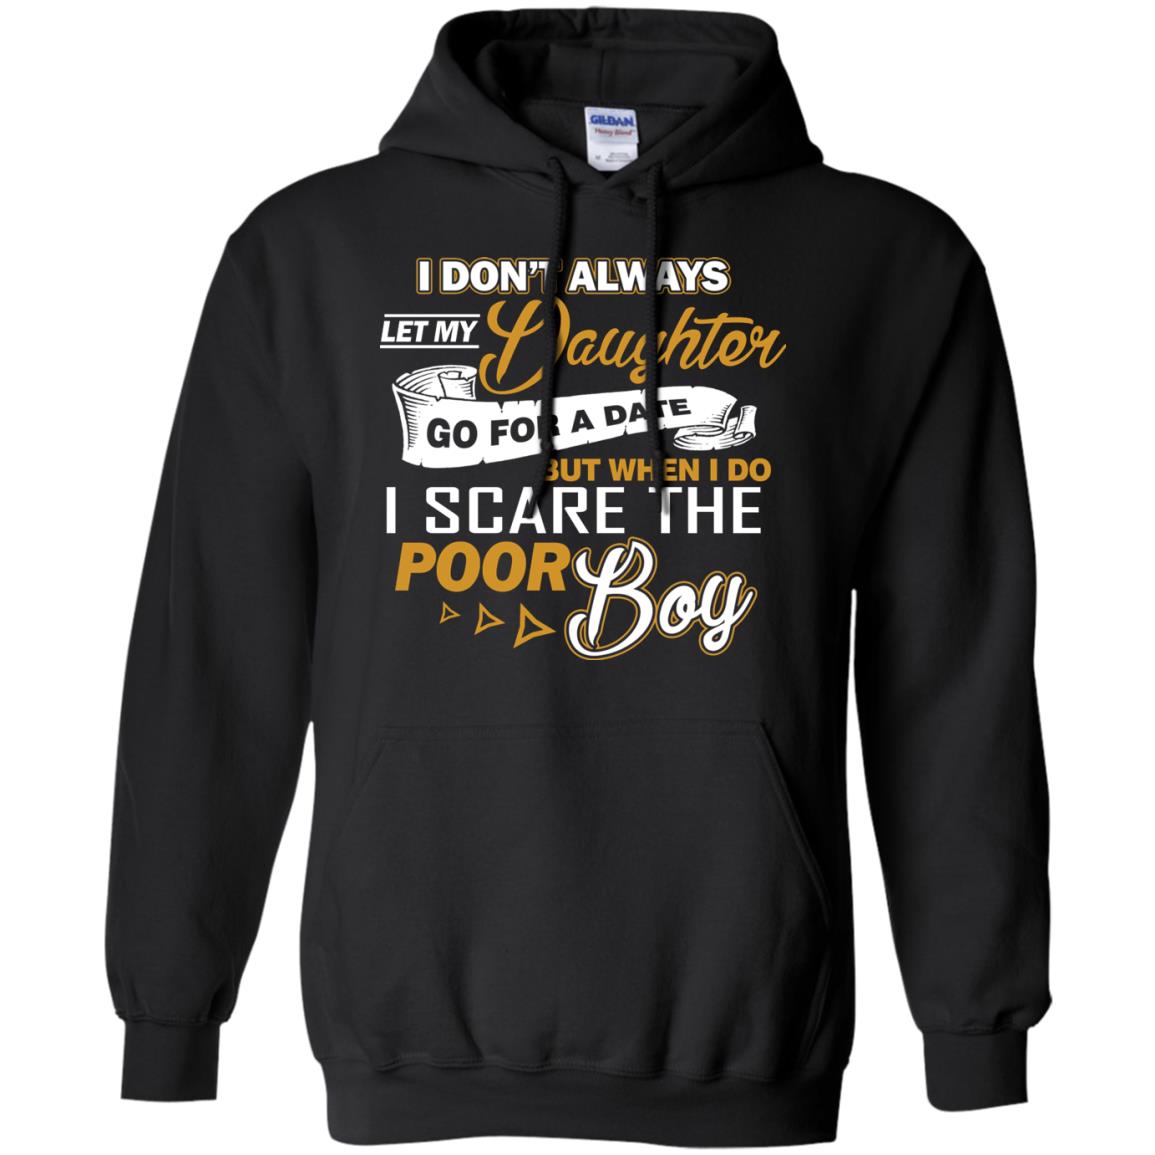 I Don’t Always Let My Daughter Go For A Date, But When I Do I Scare The Poor BoyG185 Gildan Pullover Hoodie 8 oz.